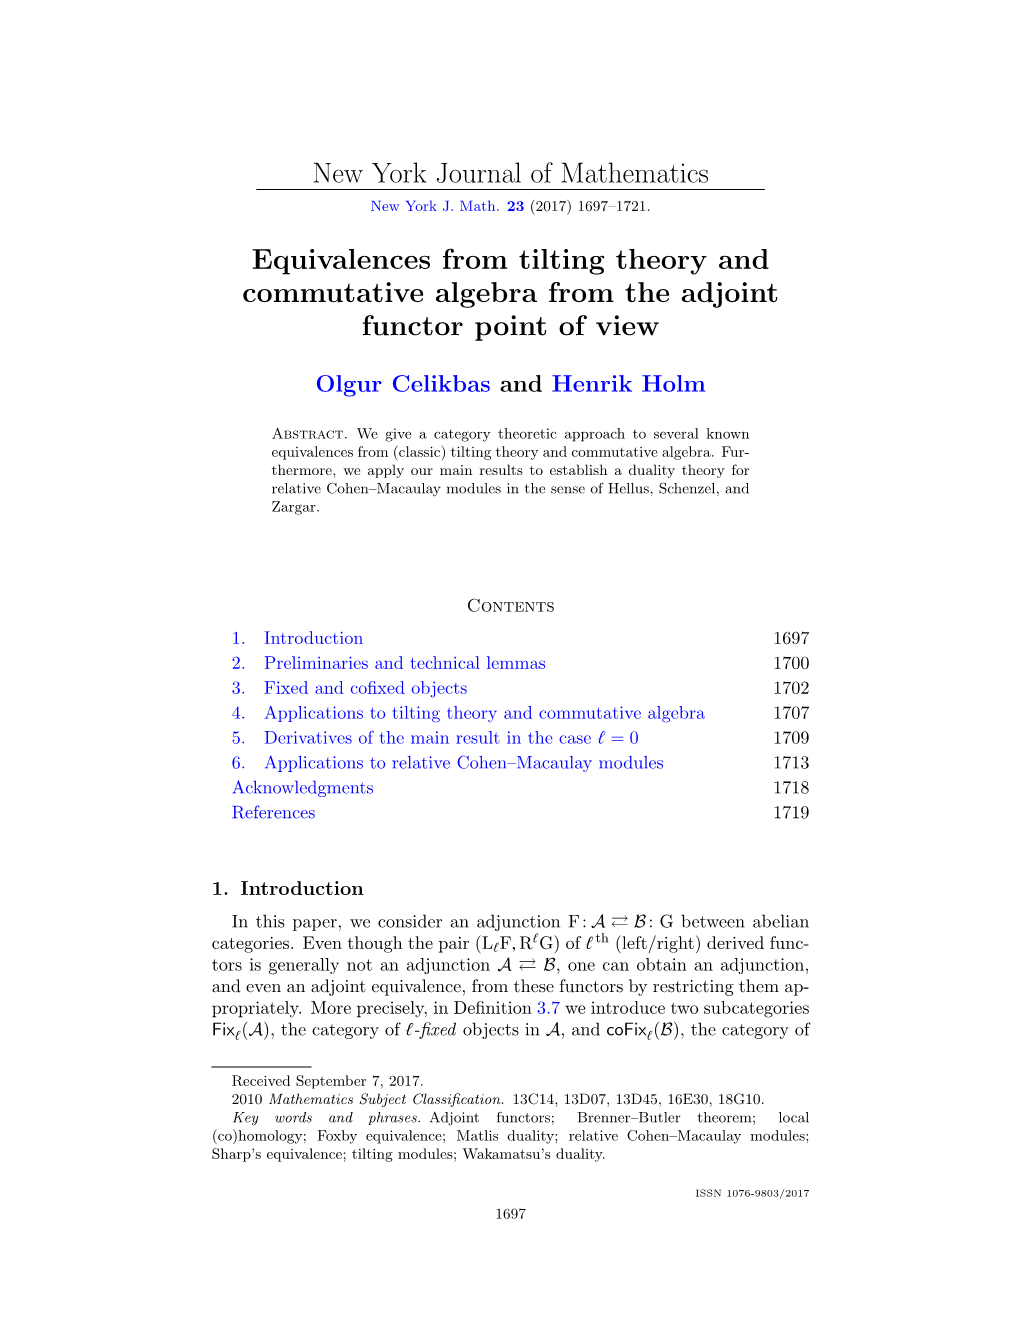 Equivalences from Tilting Theory and Commutative Algebra from the Adjoint Functor Point of View